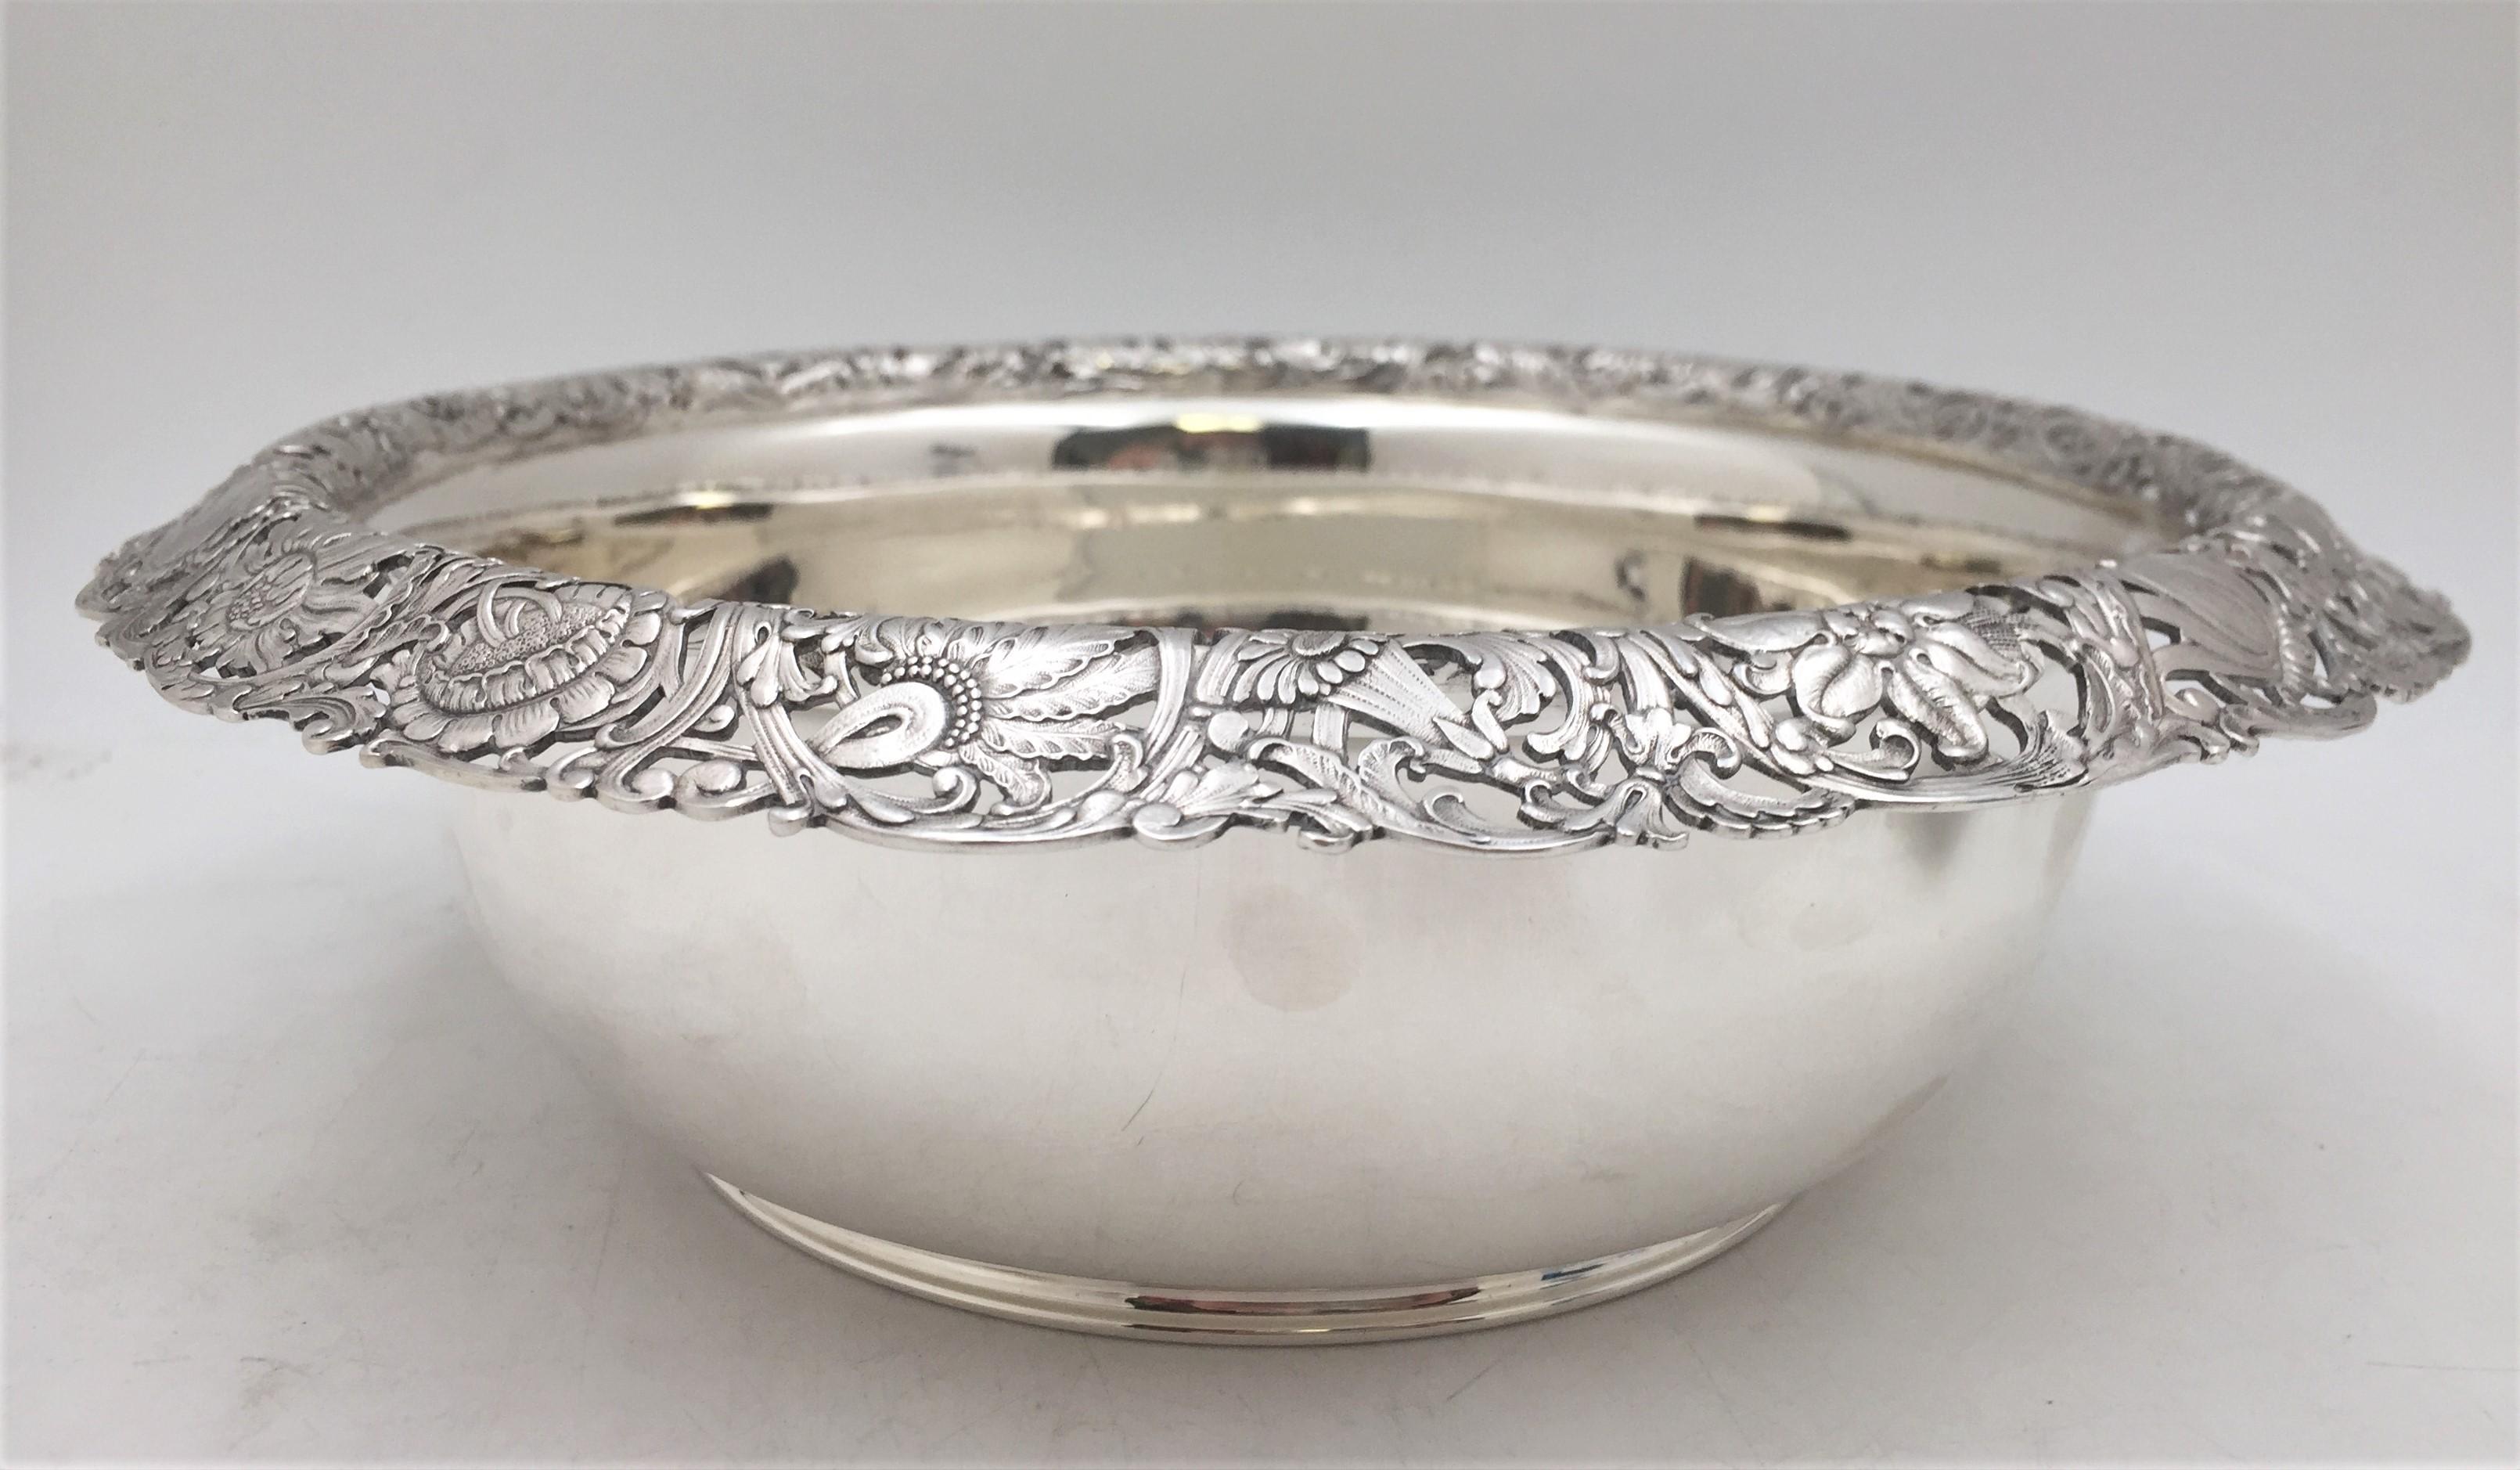 Tiffany & Co. sterling silver bowl in pattern number 9460 from the 1890s, in Art Nouveau style with flowing floral and palmette design adorning the rim. It measures 10'' in diameter by 3 1/8'' in height, weighs 21.8 troy ounces, and bears hallmarks